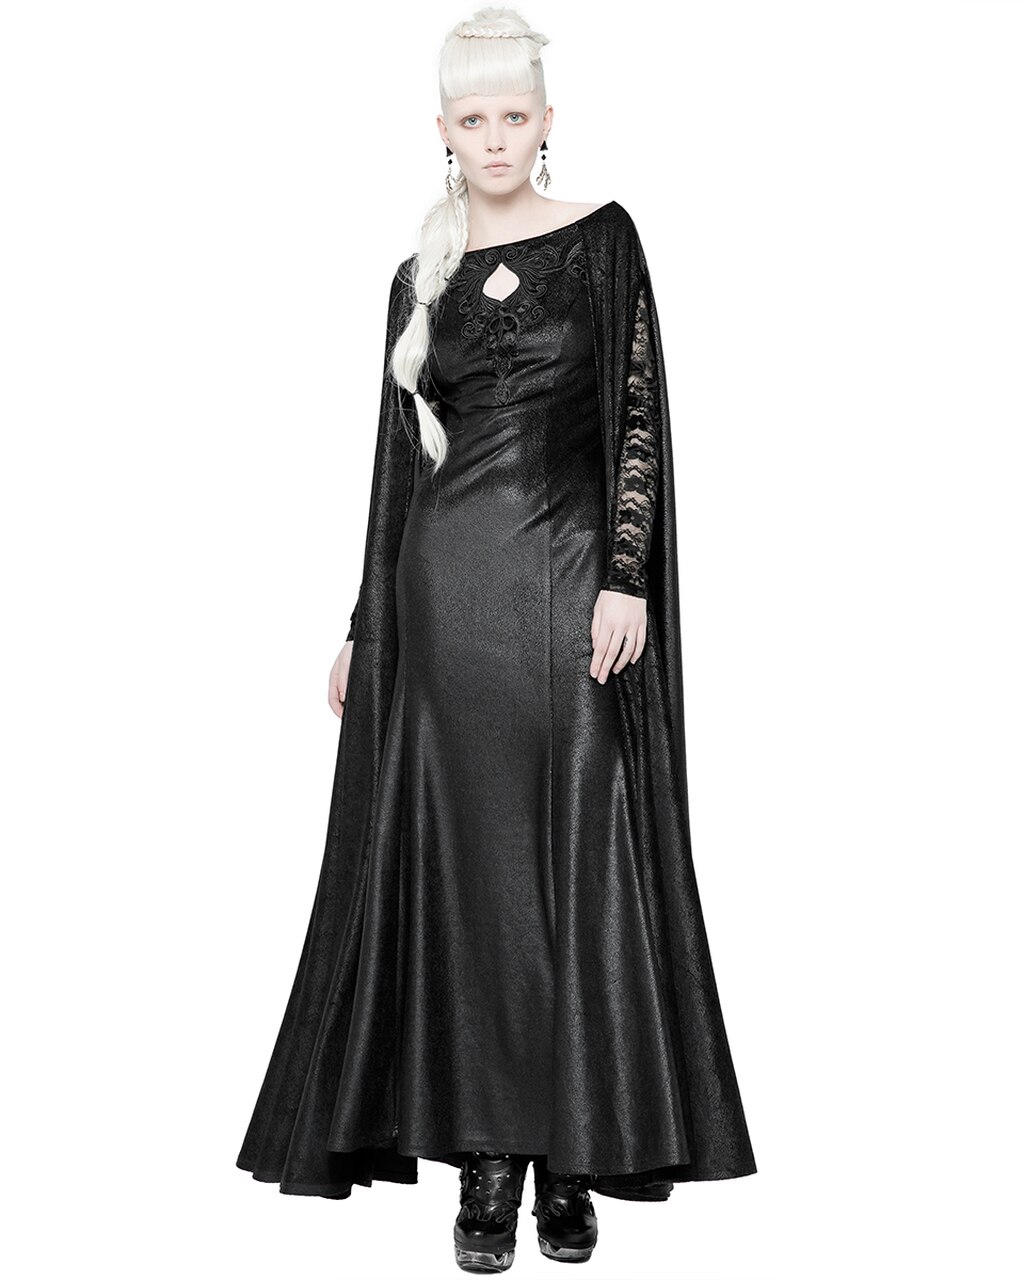 Black 'Nightspell' Long Gothic Cape Dress by Punk Rave • the dark store™